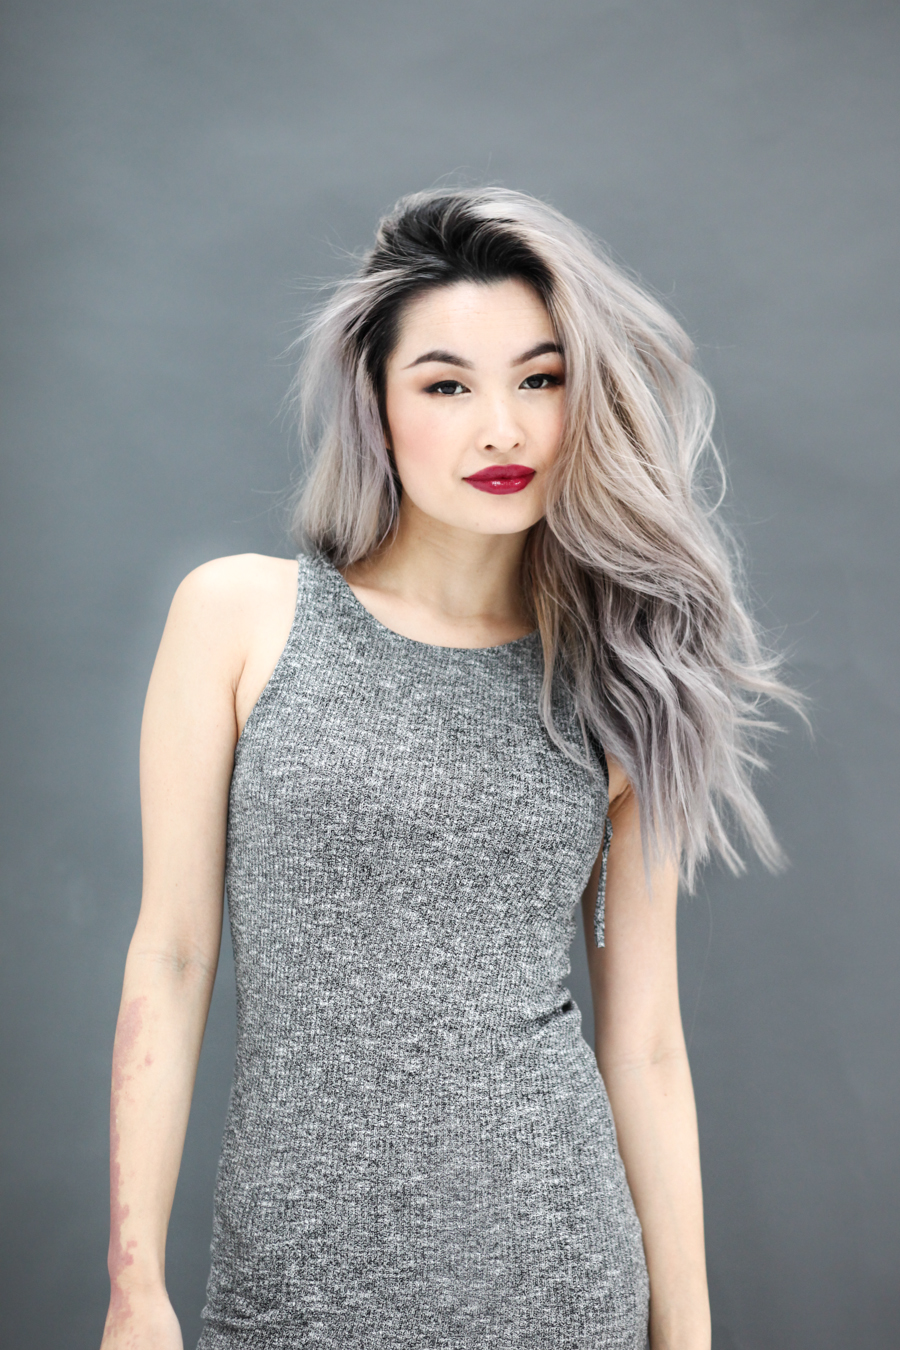 Grey hair: Hide or Not to Hide? – HairStyles for Women